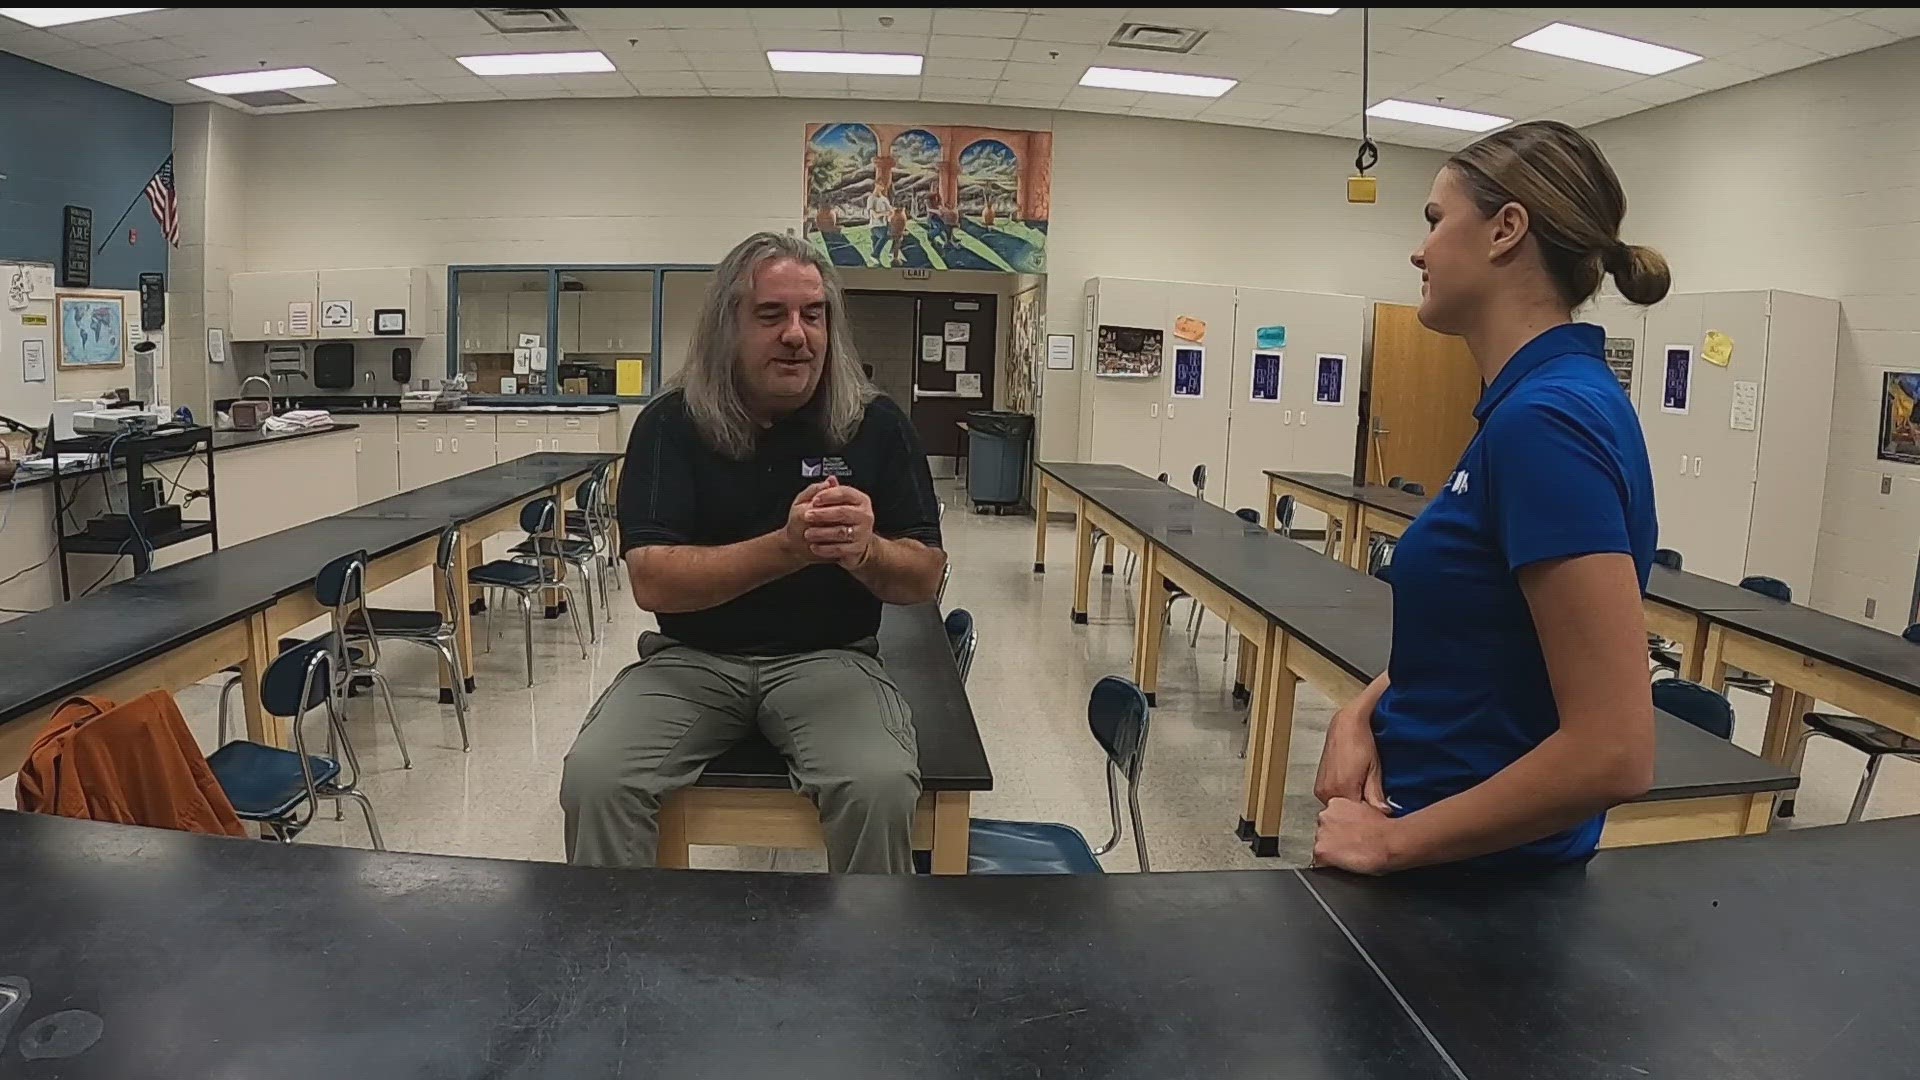 Buffalo High School's Mr. Holtz shares his lessons learned from 30 years of teaching.